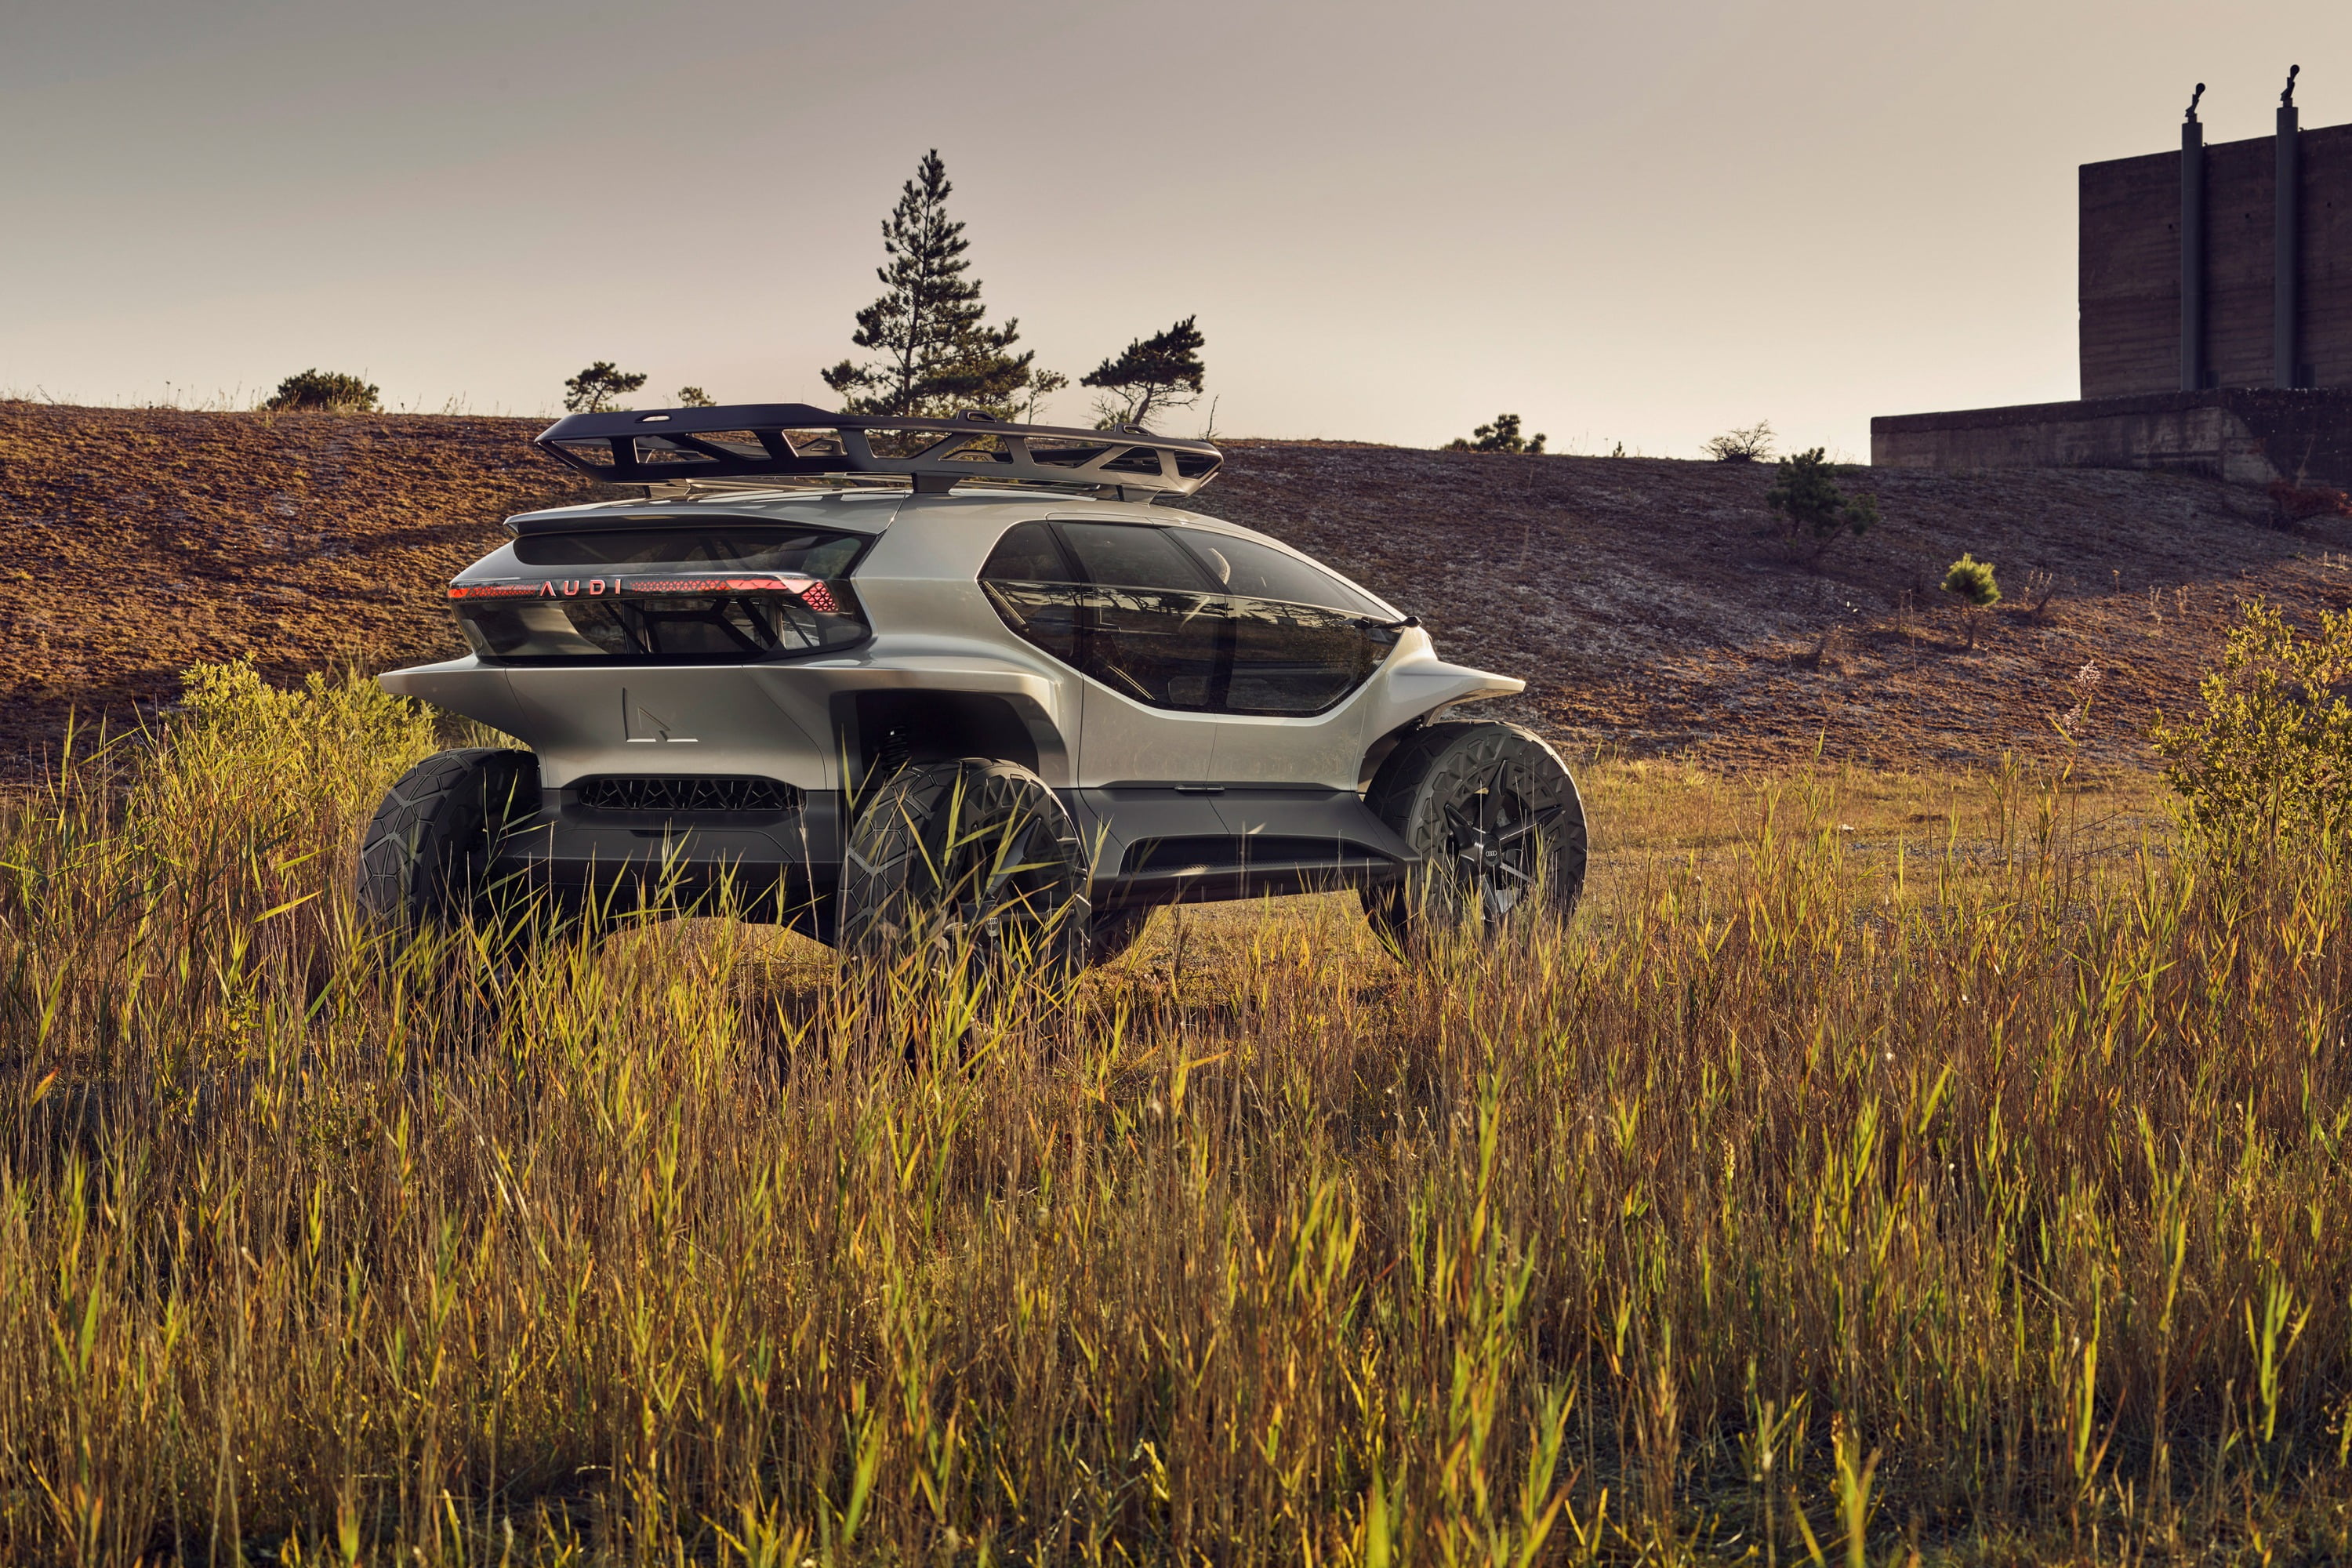 The Audi AI:TRAIL quattro, a comprehensive concept for sustainable mobility off the beaten track.